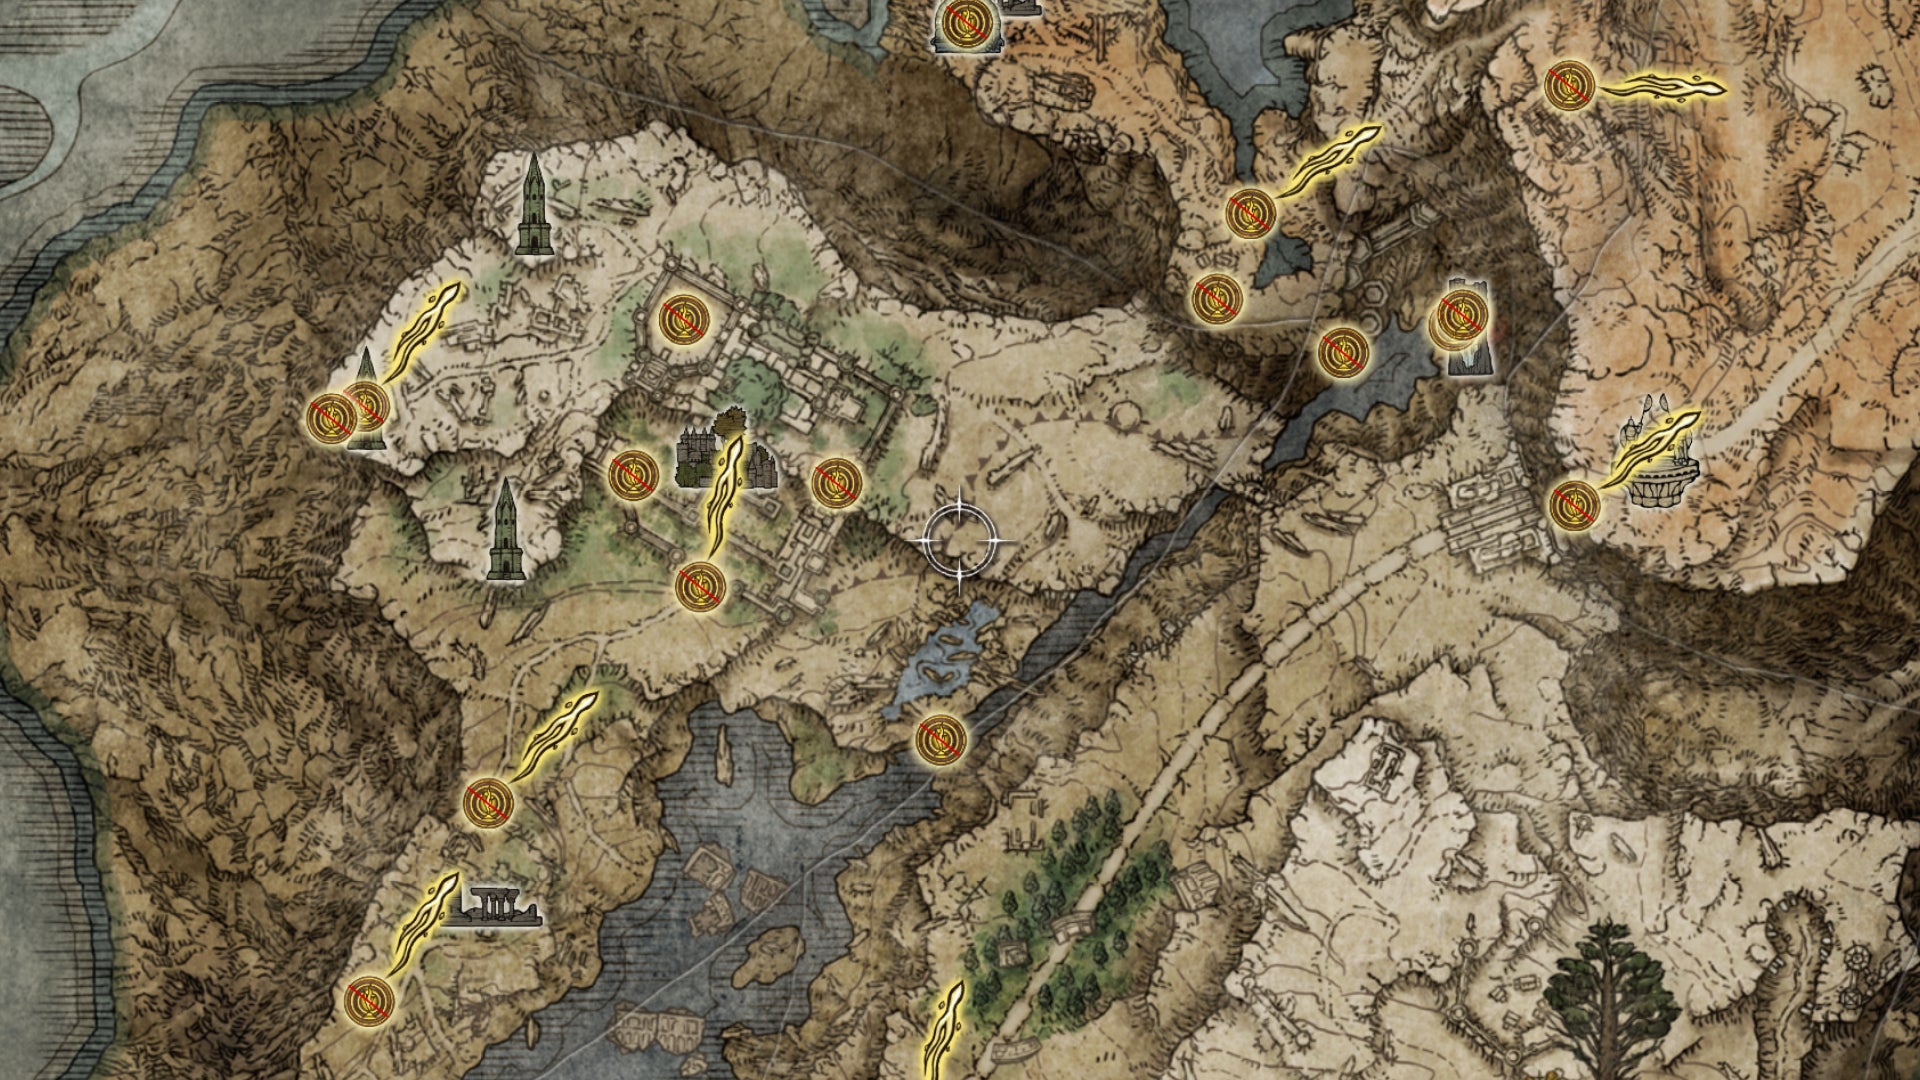 Part of the Elden Ring map. All the Site of Grace icons have a line through them, indicating that fast travel is currently disabled.